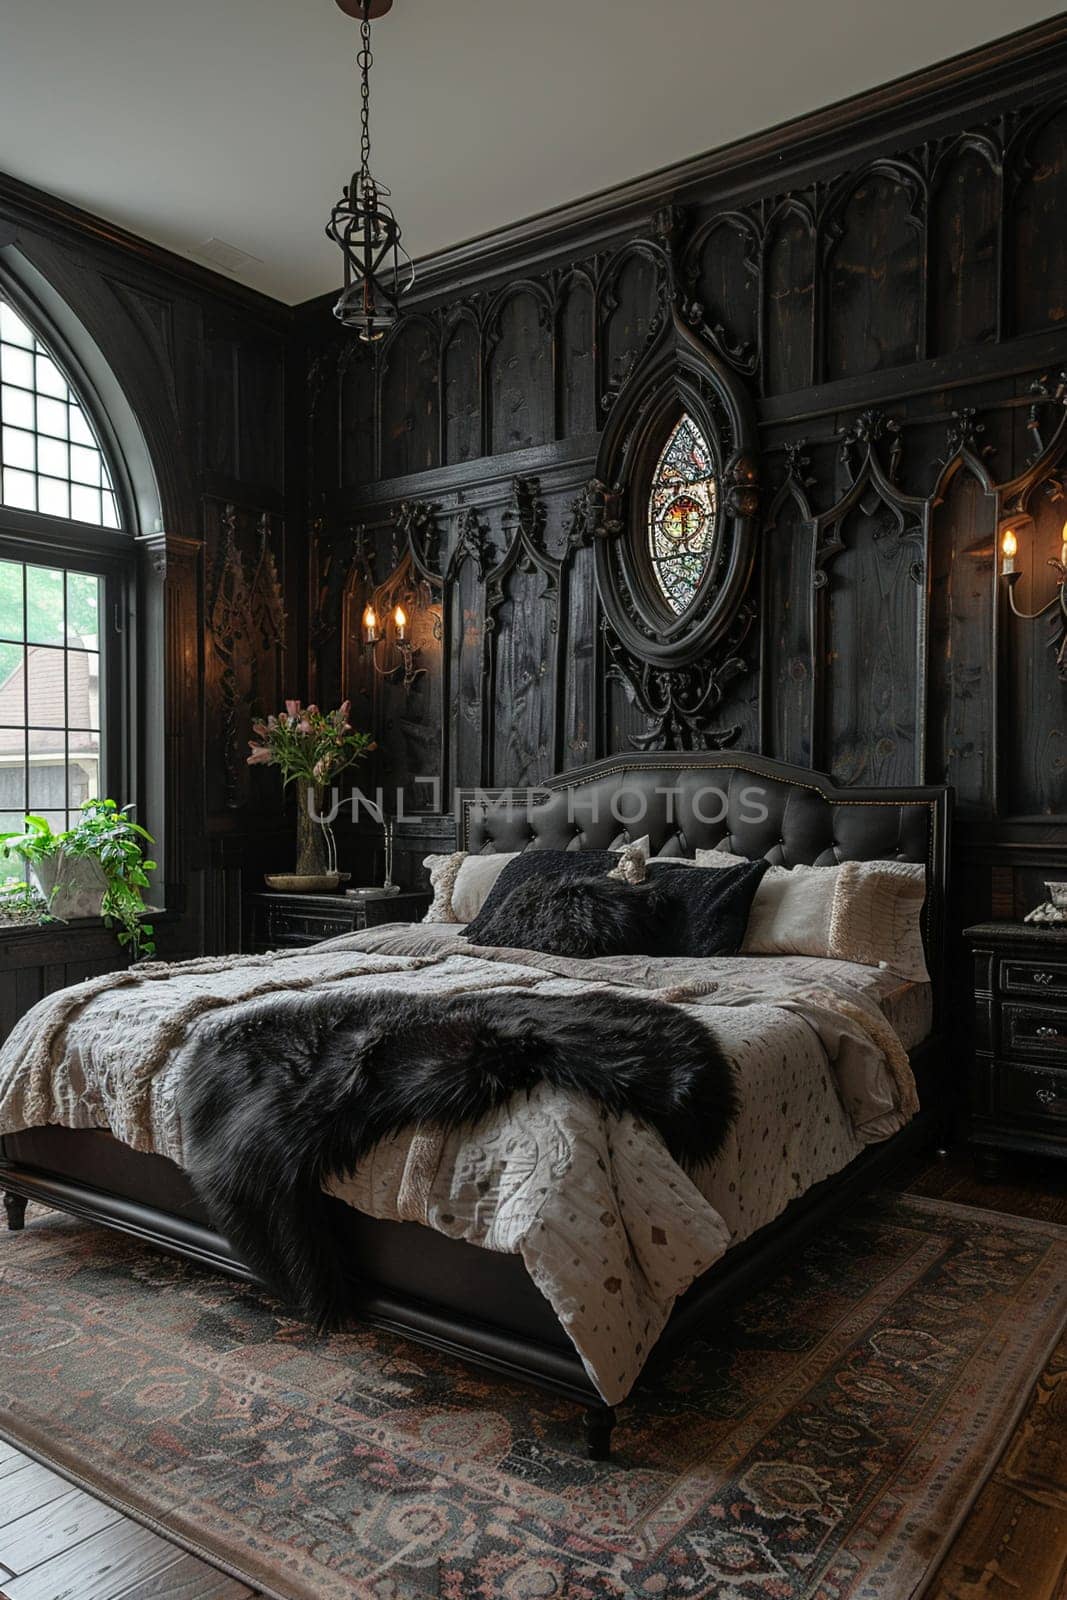 Modern Gothic bedroom with dark colors and dramatic decor8K